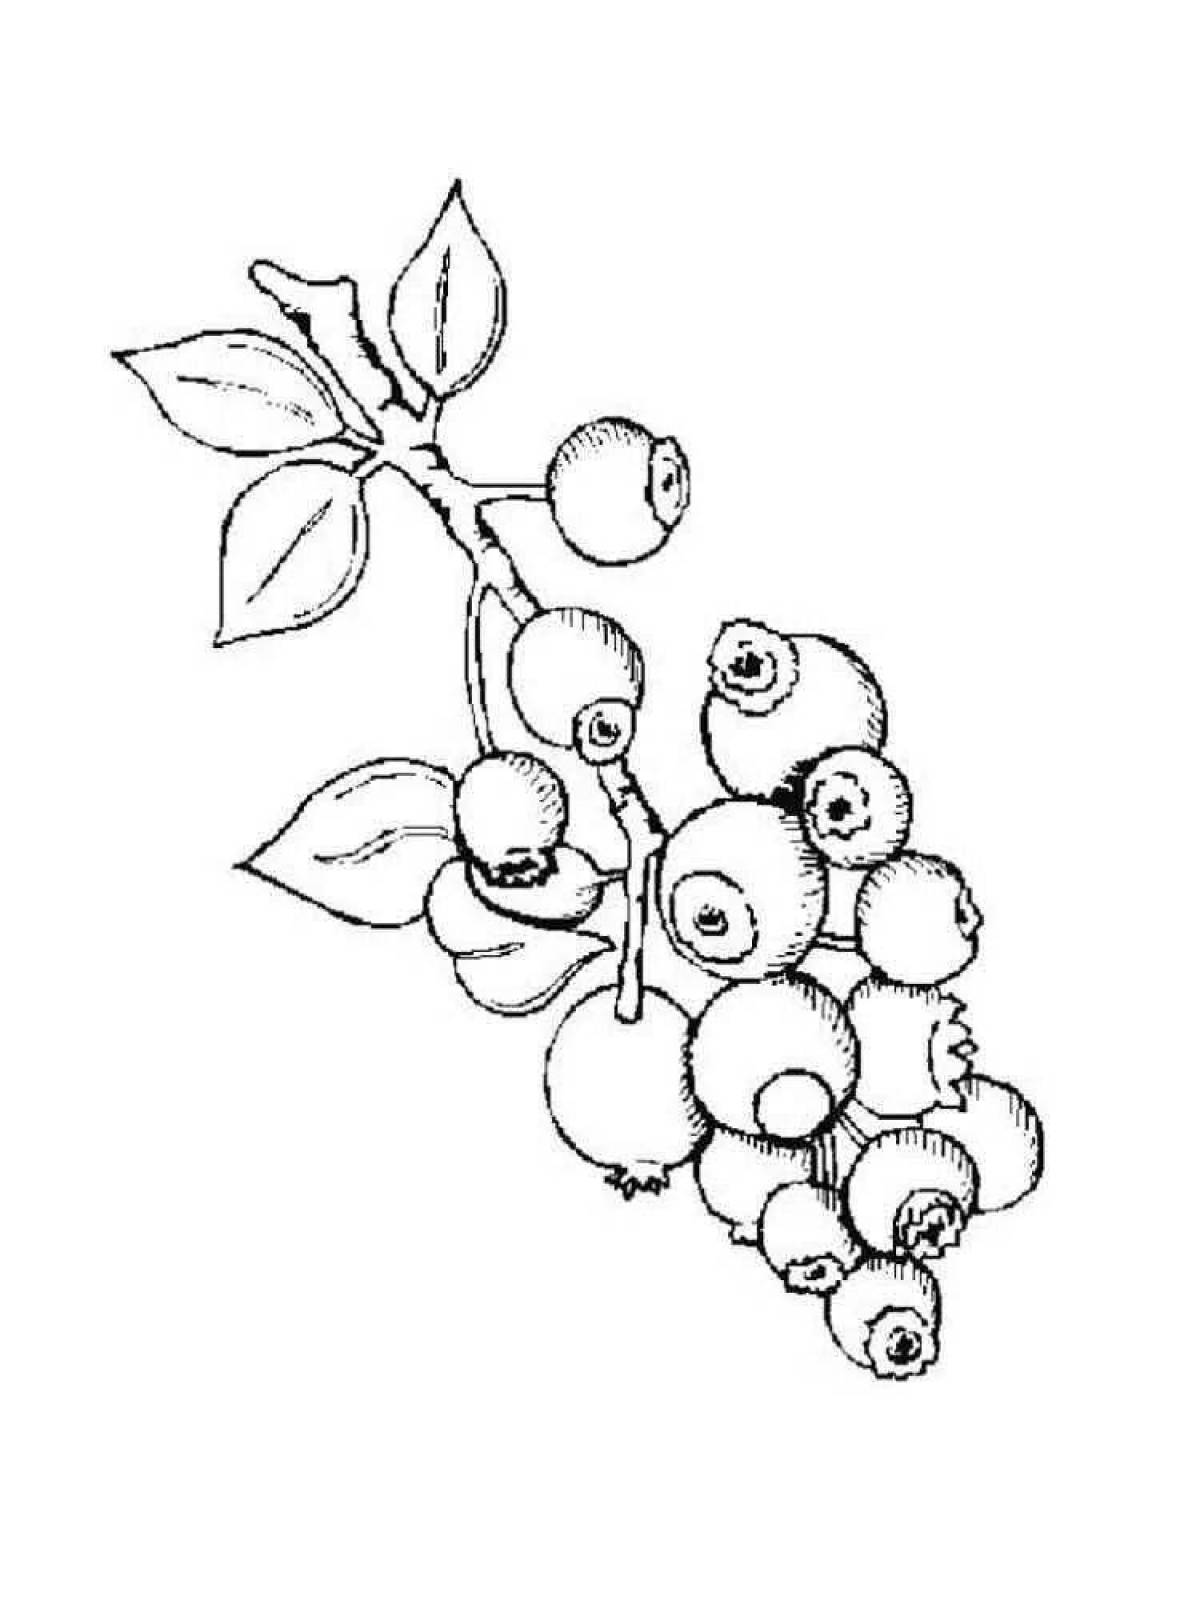 Playful blueberry coloring page